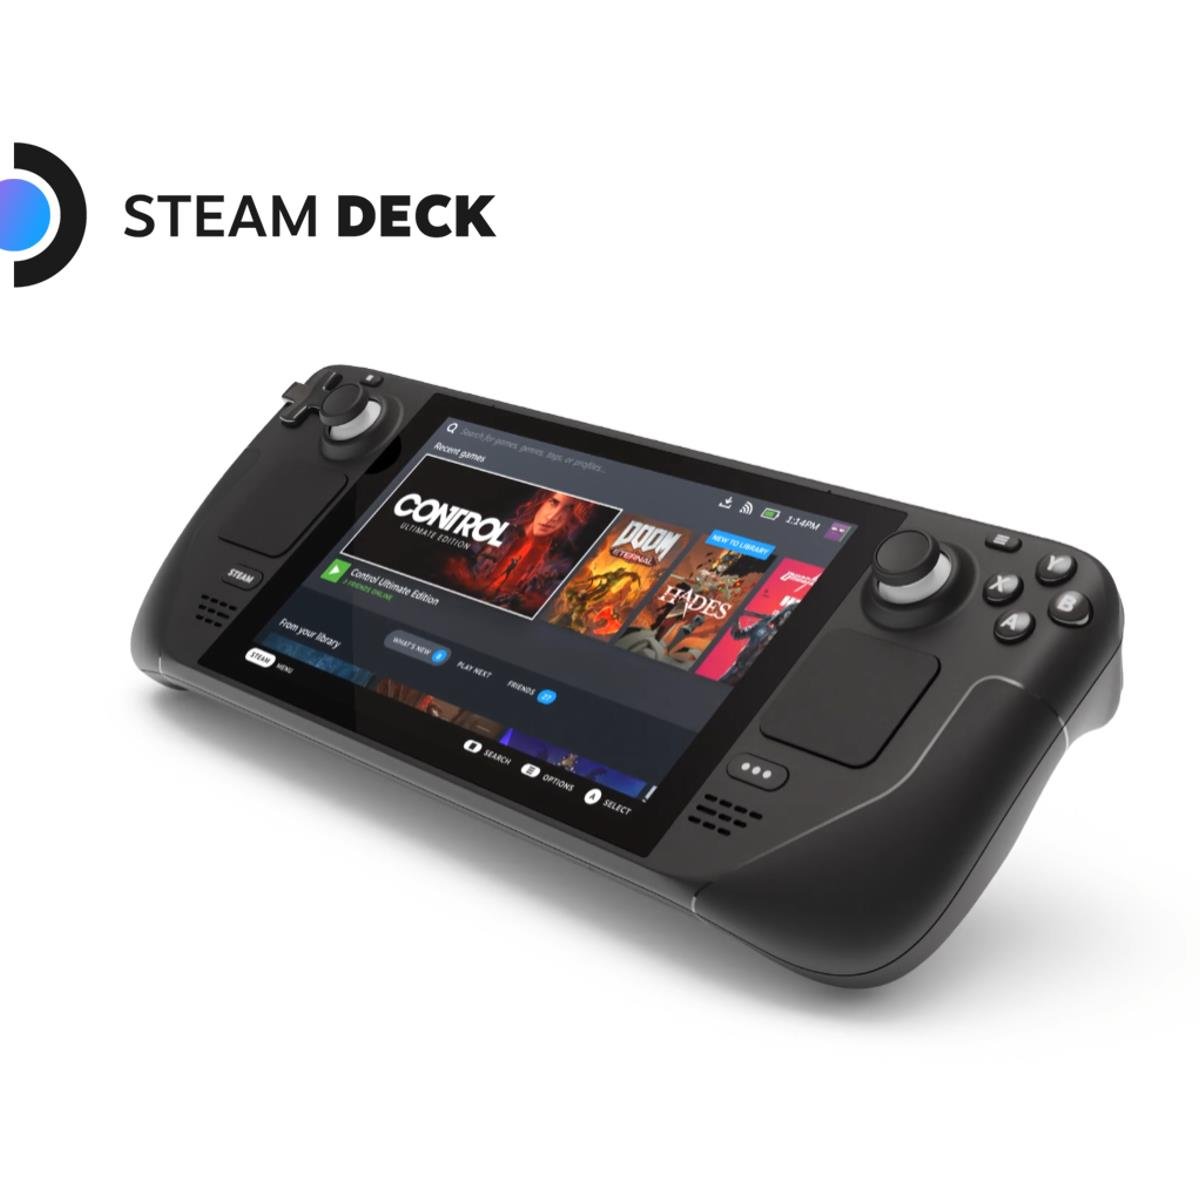 Valve Details Steam Deck's AMD Aerith CPU, FSR, Game Load Time, And You Can  Build One Too